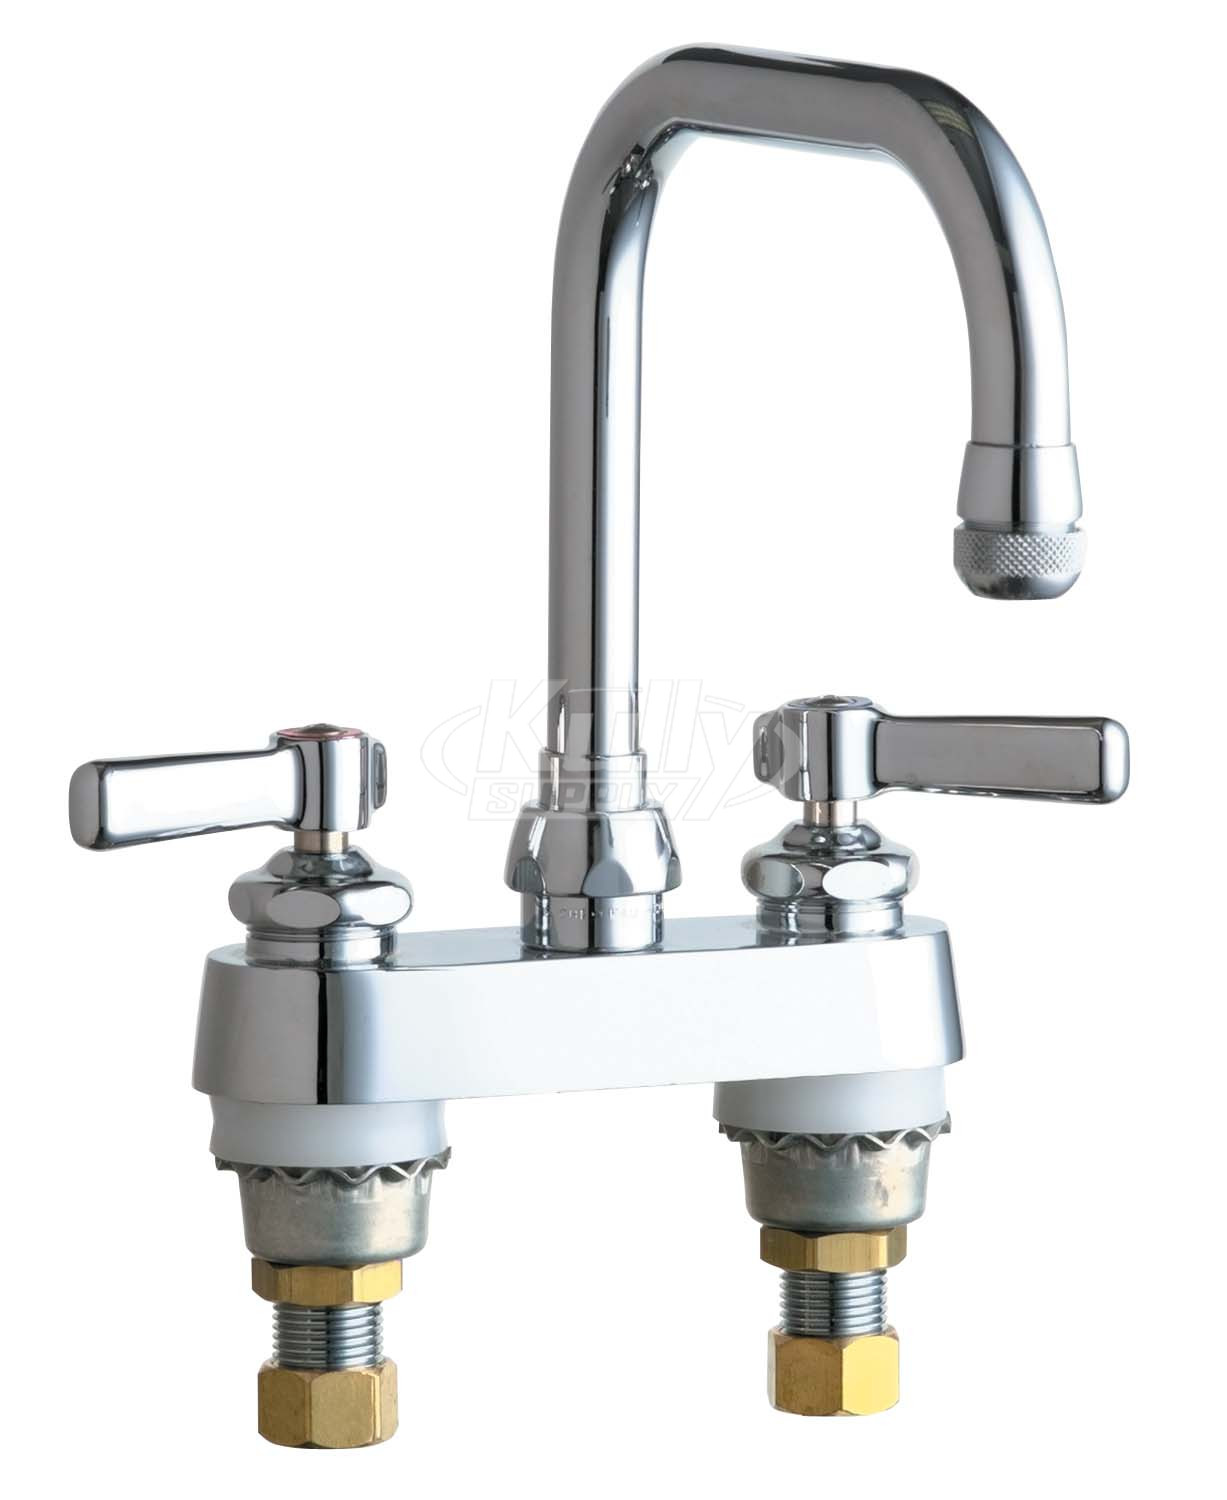 Chicago 526-XKCP Sink Faucet (Discontinued)